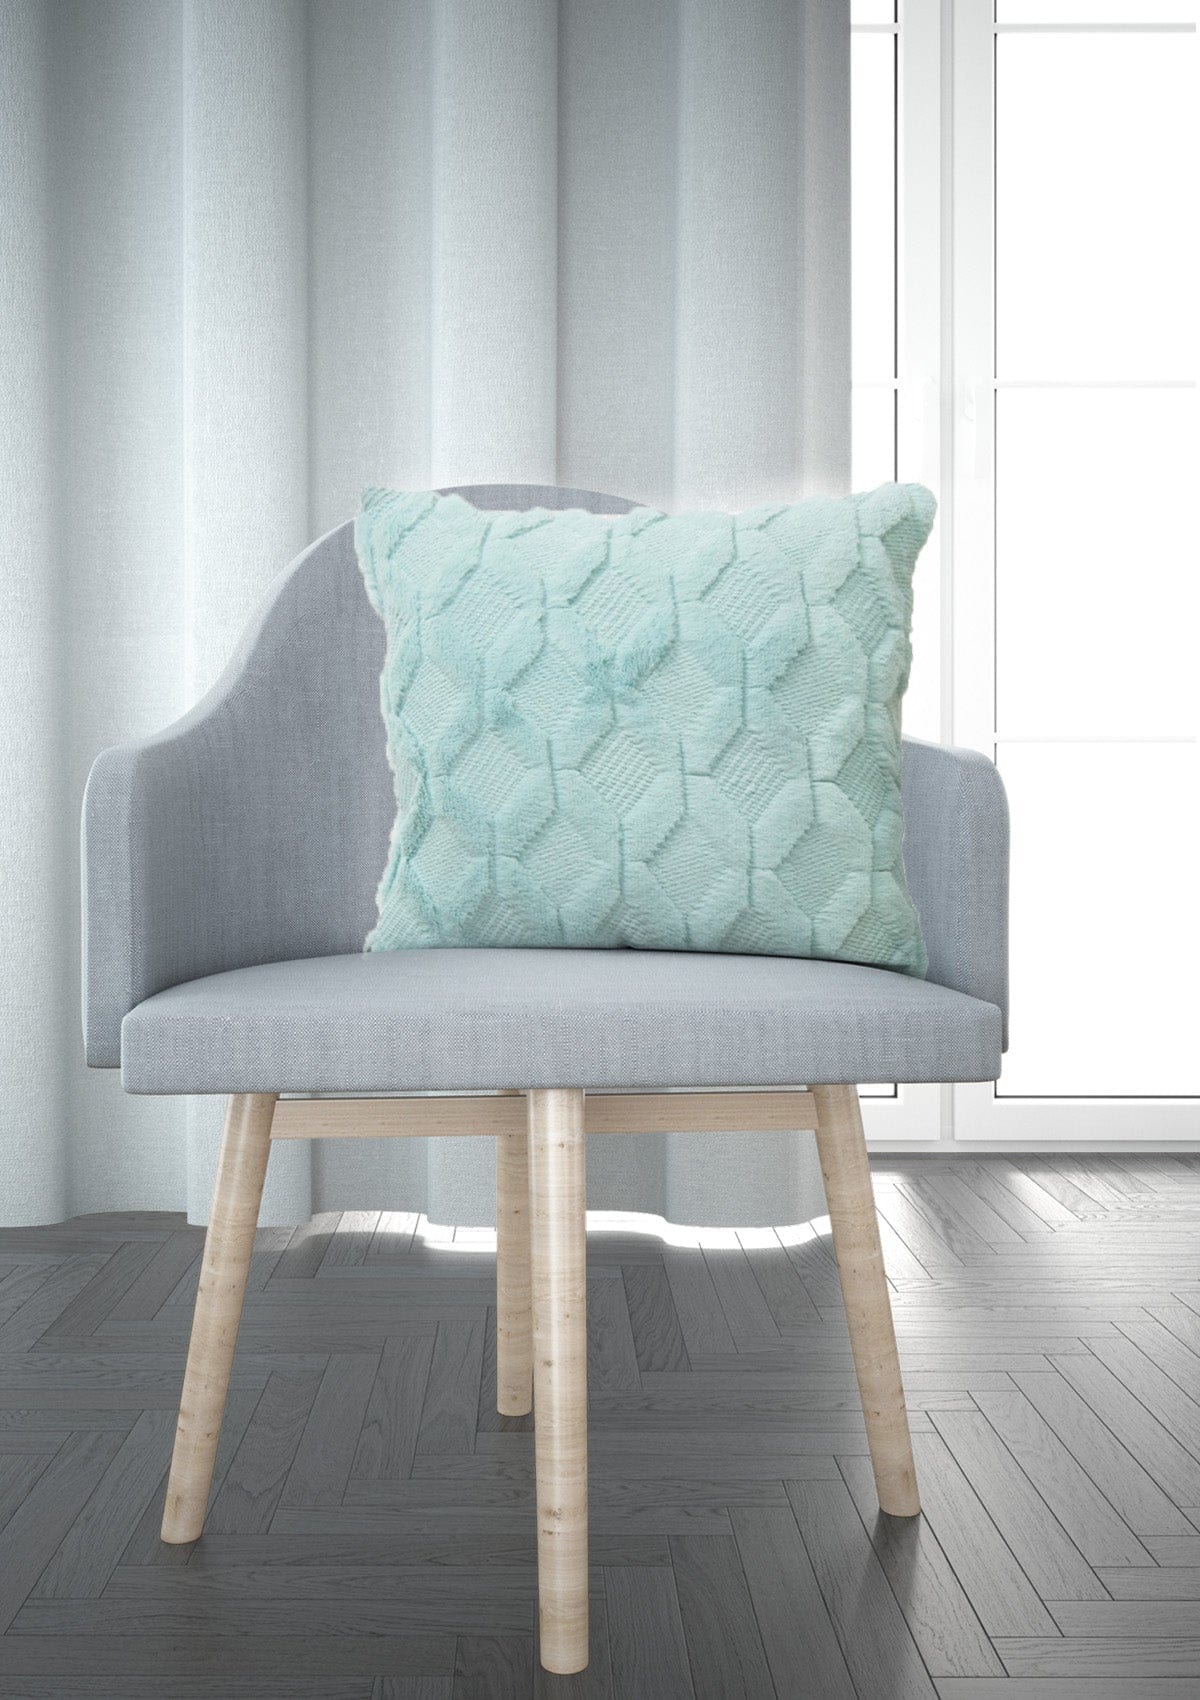 Teal Elegance Fluffy Cushion Covers | CovermyCushion 30x50cm / Teal / No thanks - cover only